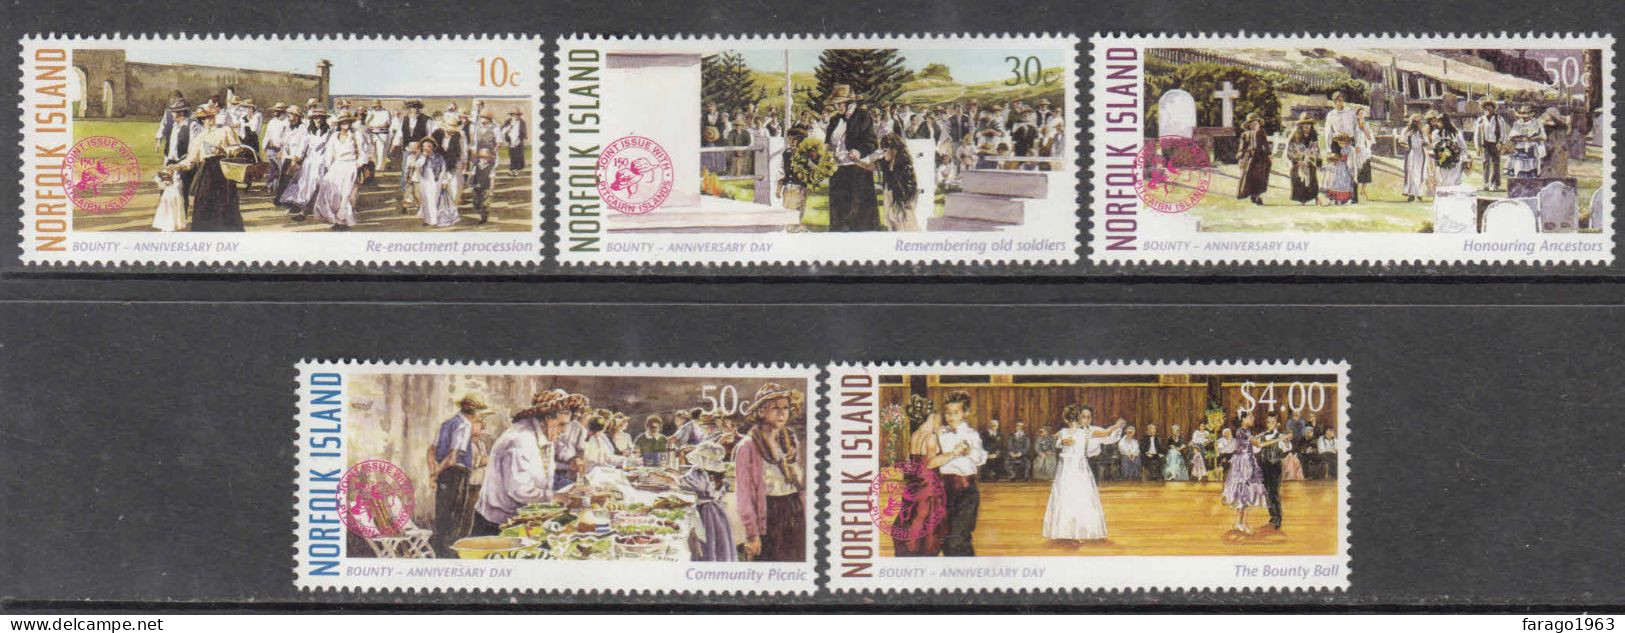 2006 Norfolk Island Bounty Anniversary Day JOINT ISSUE Pitcairn  Complete Set Of 5 MNH - Ile Norfolk